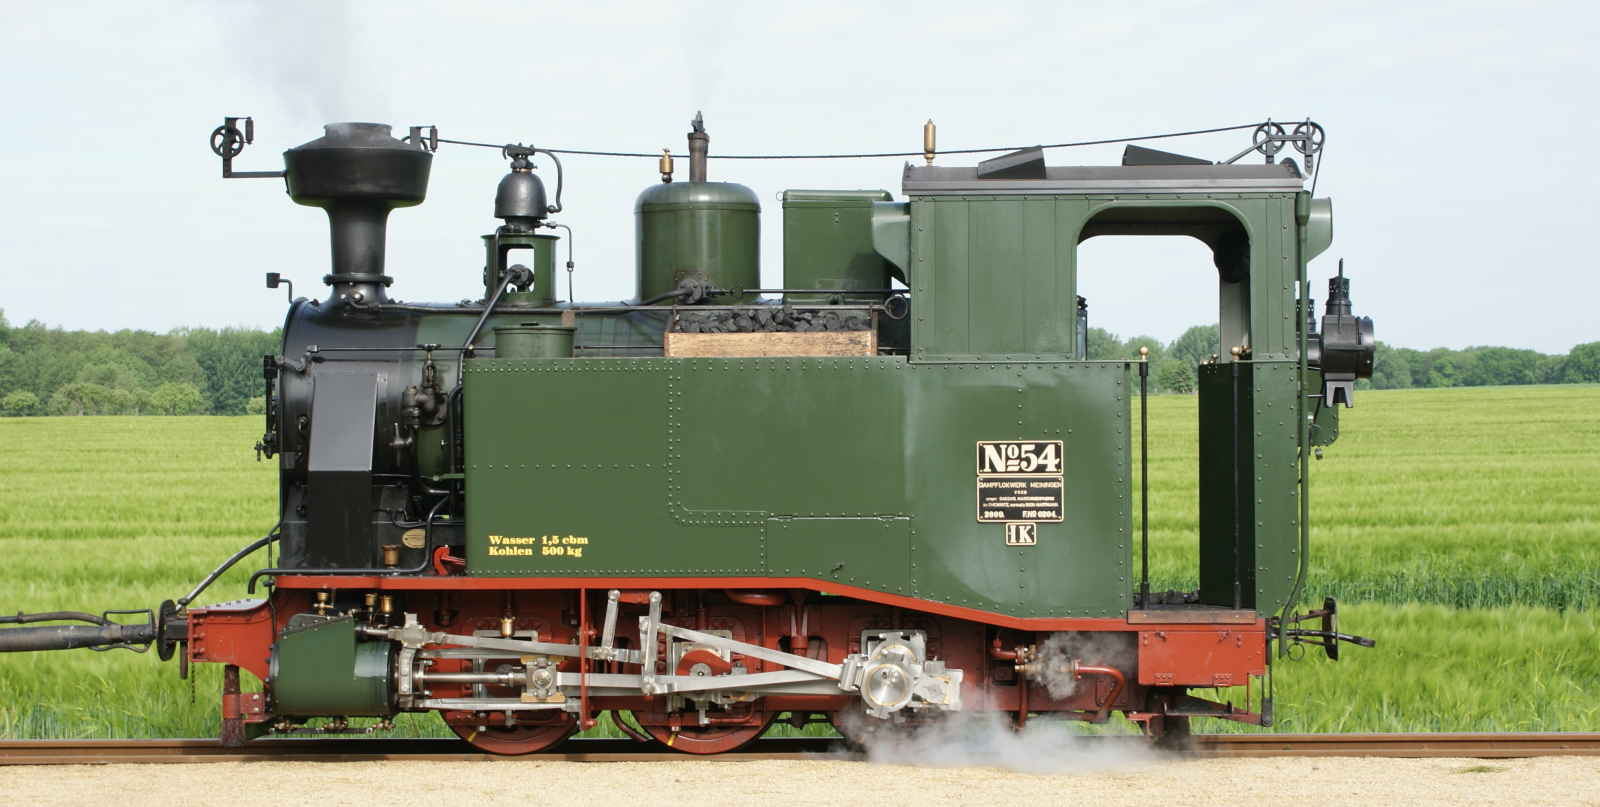 No. 54, the engine from 2009, in June 2010 in Naundorf